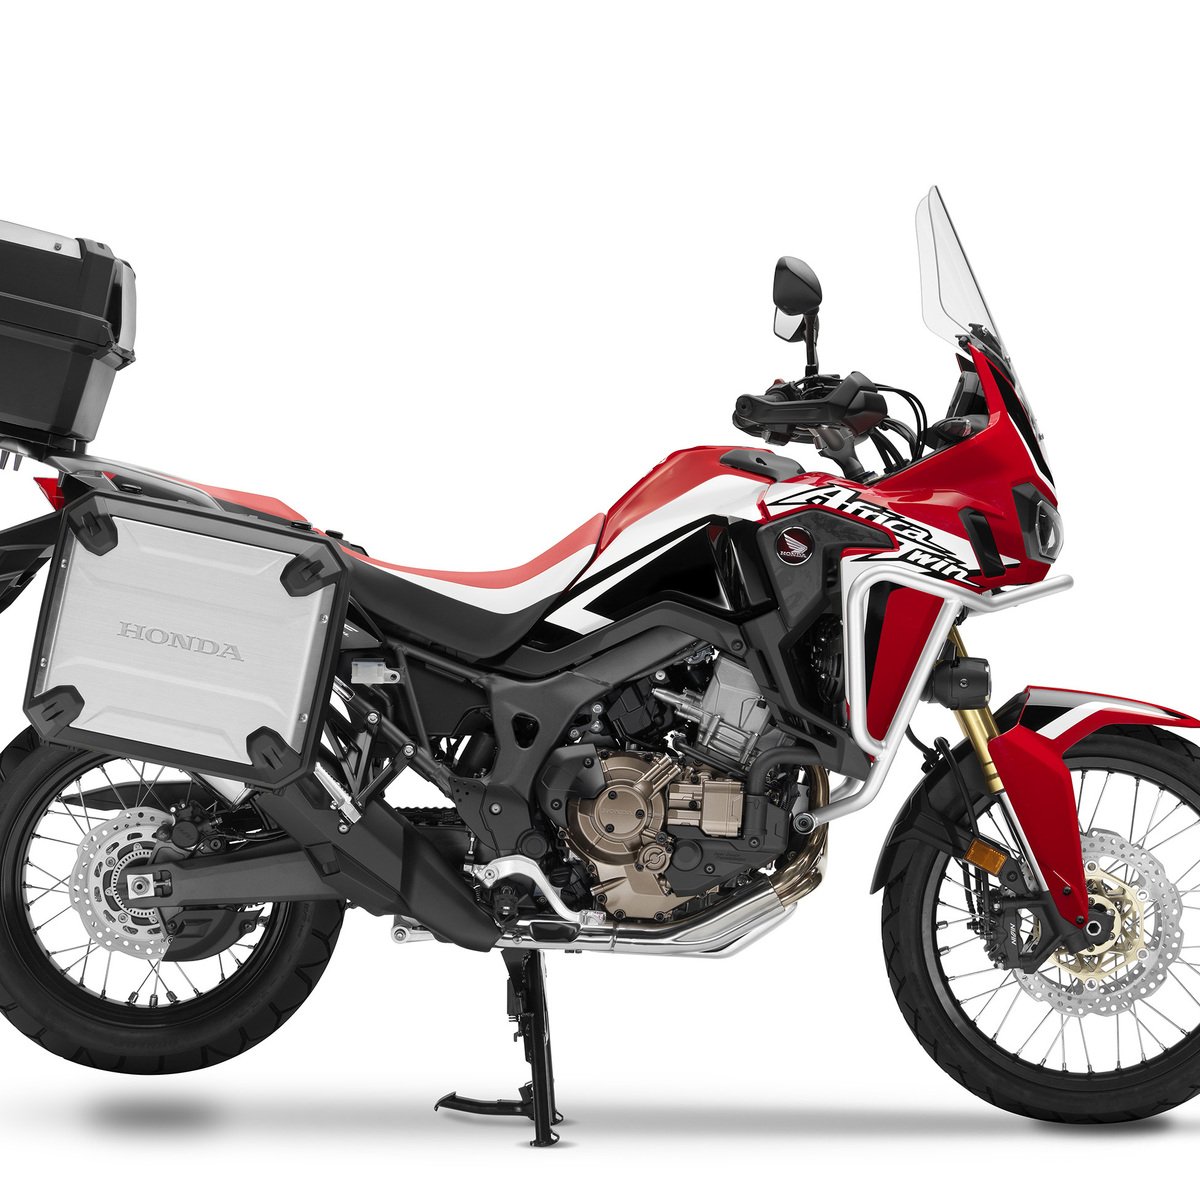 Honda Africa Twin CRF 1000L DCT ABS Travel Edition (2016 - 17)